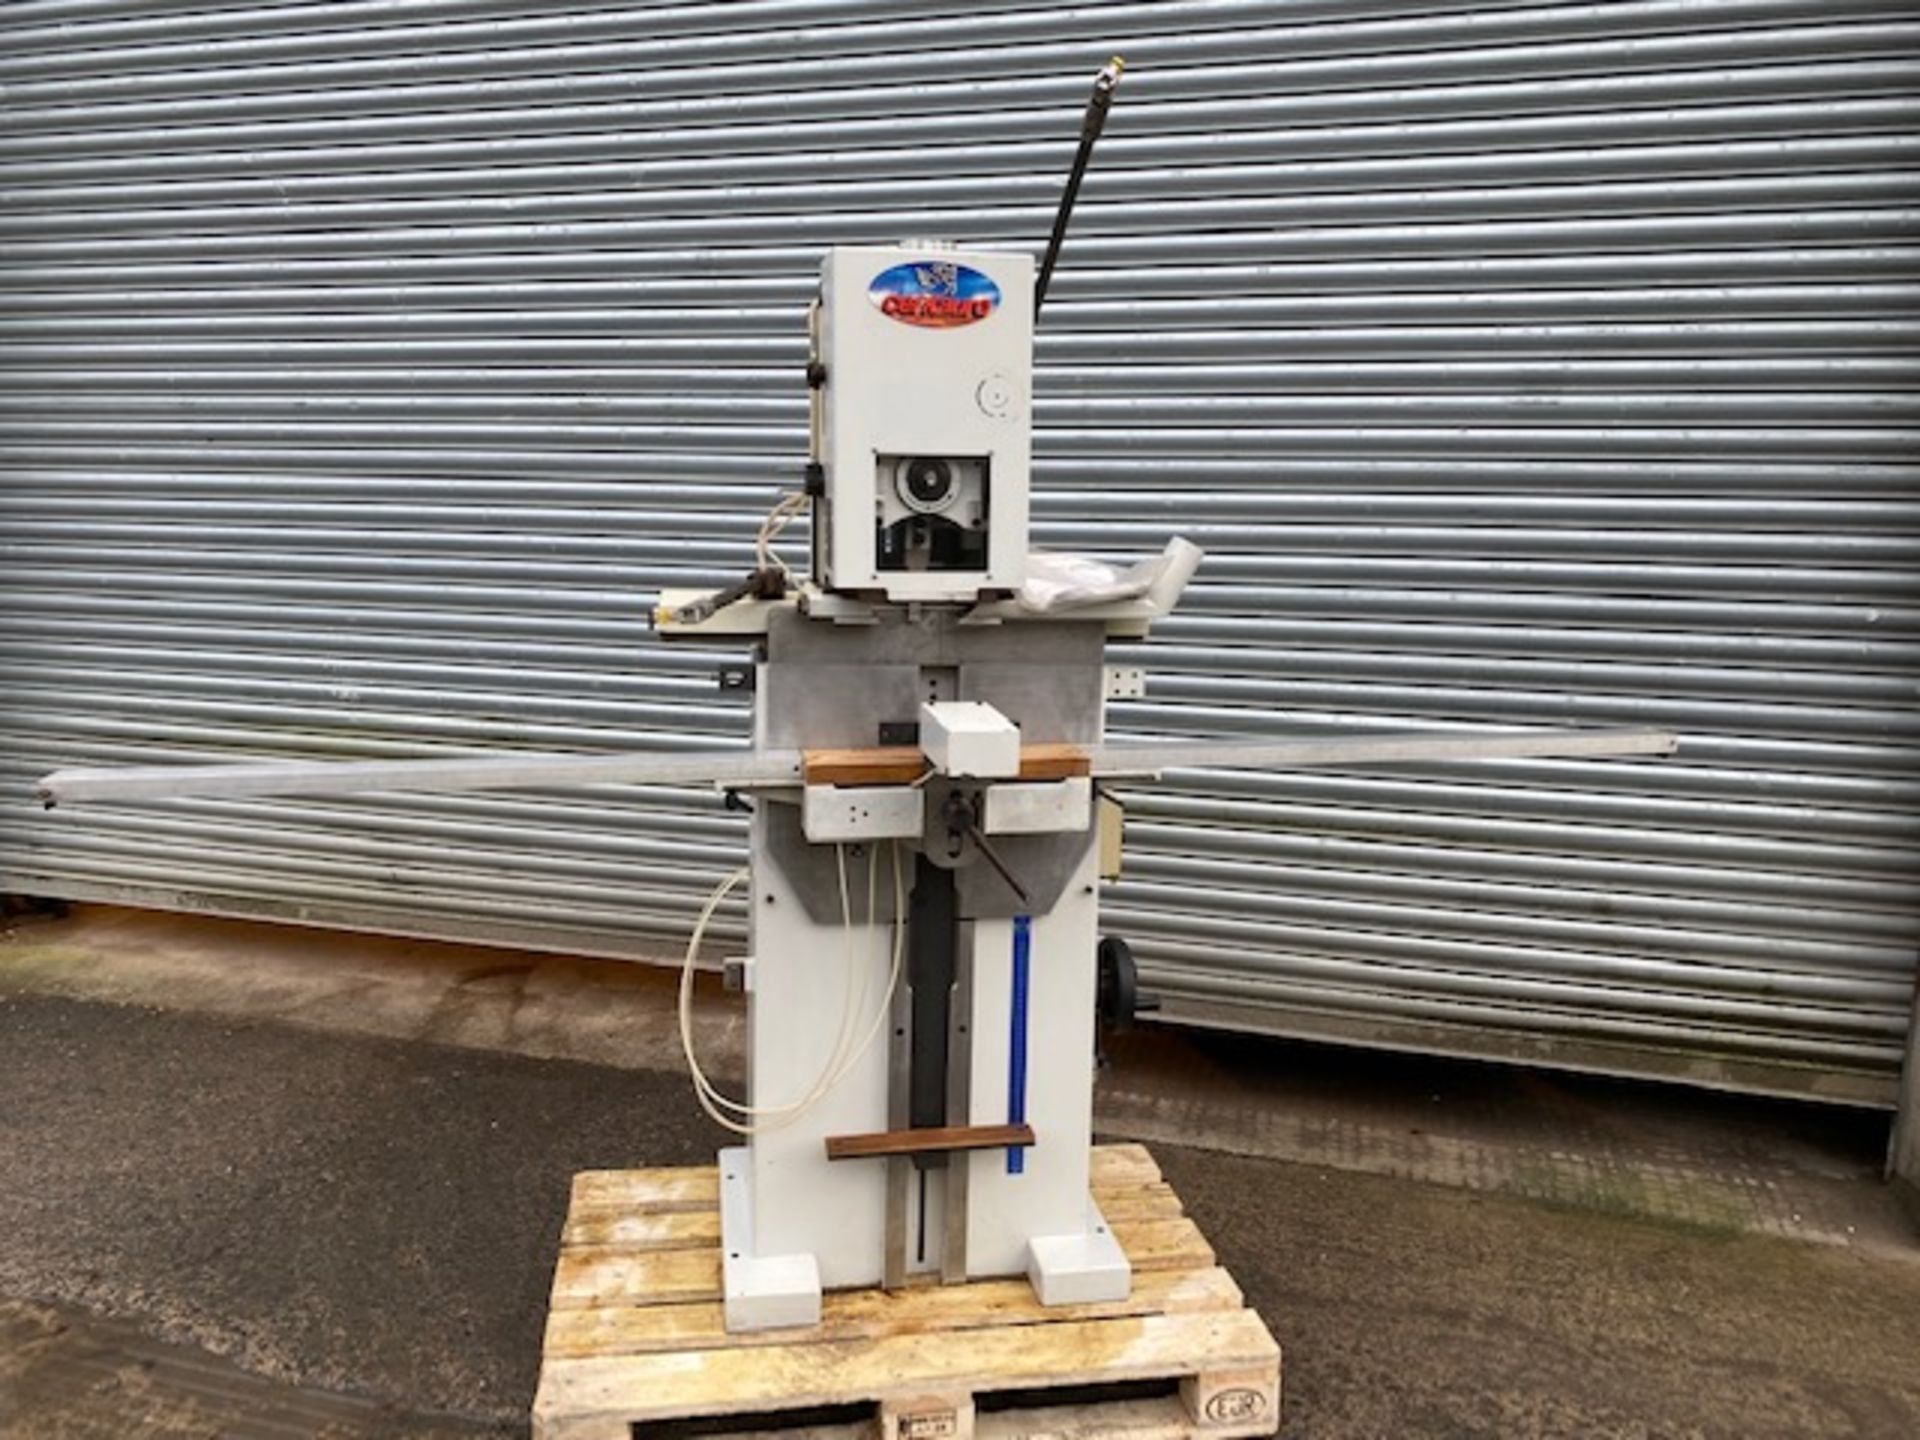 Centauro BVM Vertical Chisel Morticer, year of manufacture 2002 (vendors comments - good condition),